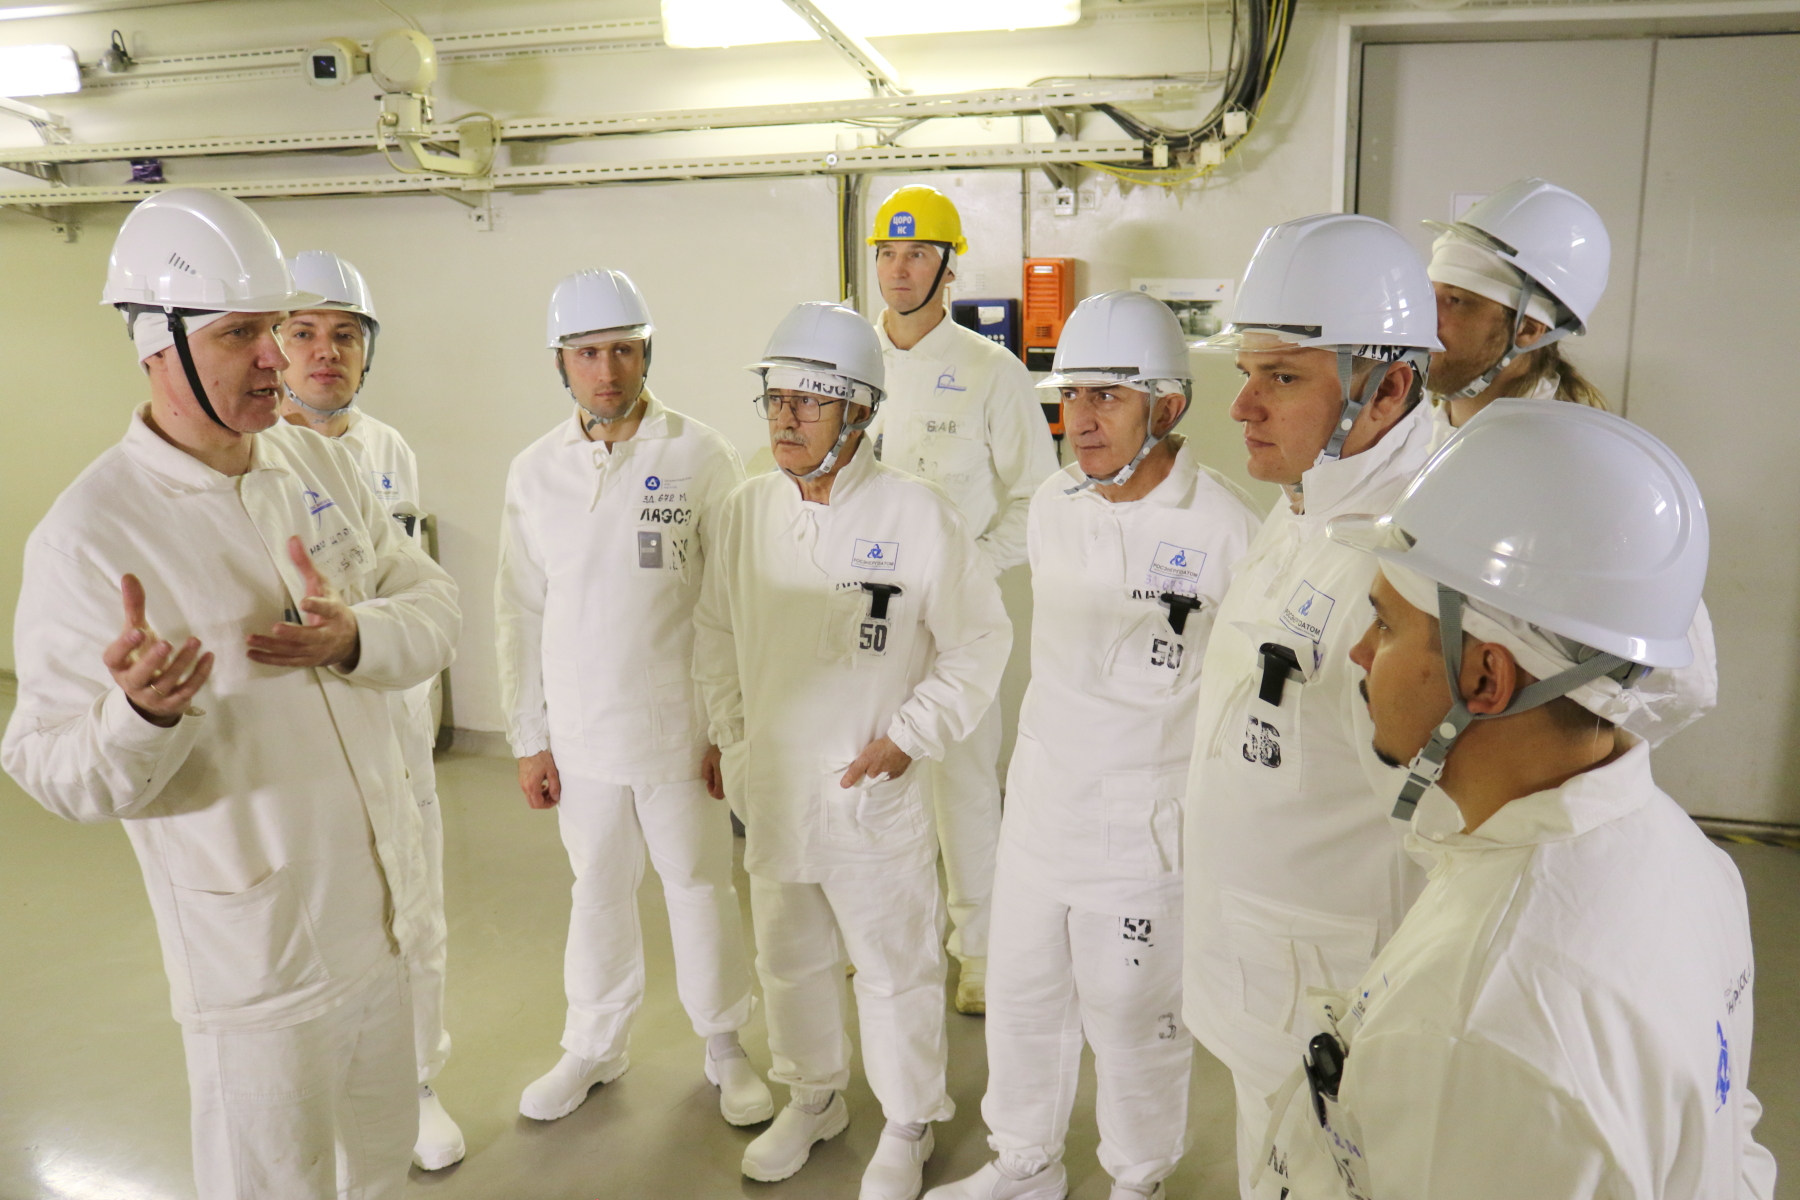 The delegation of the Republic of Armenia visited the Leningrad NPP with a technical tour